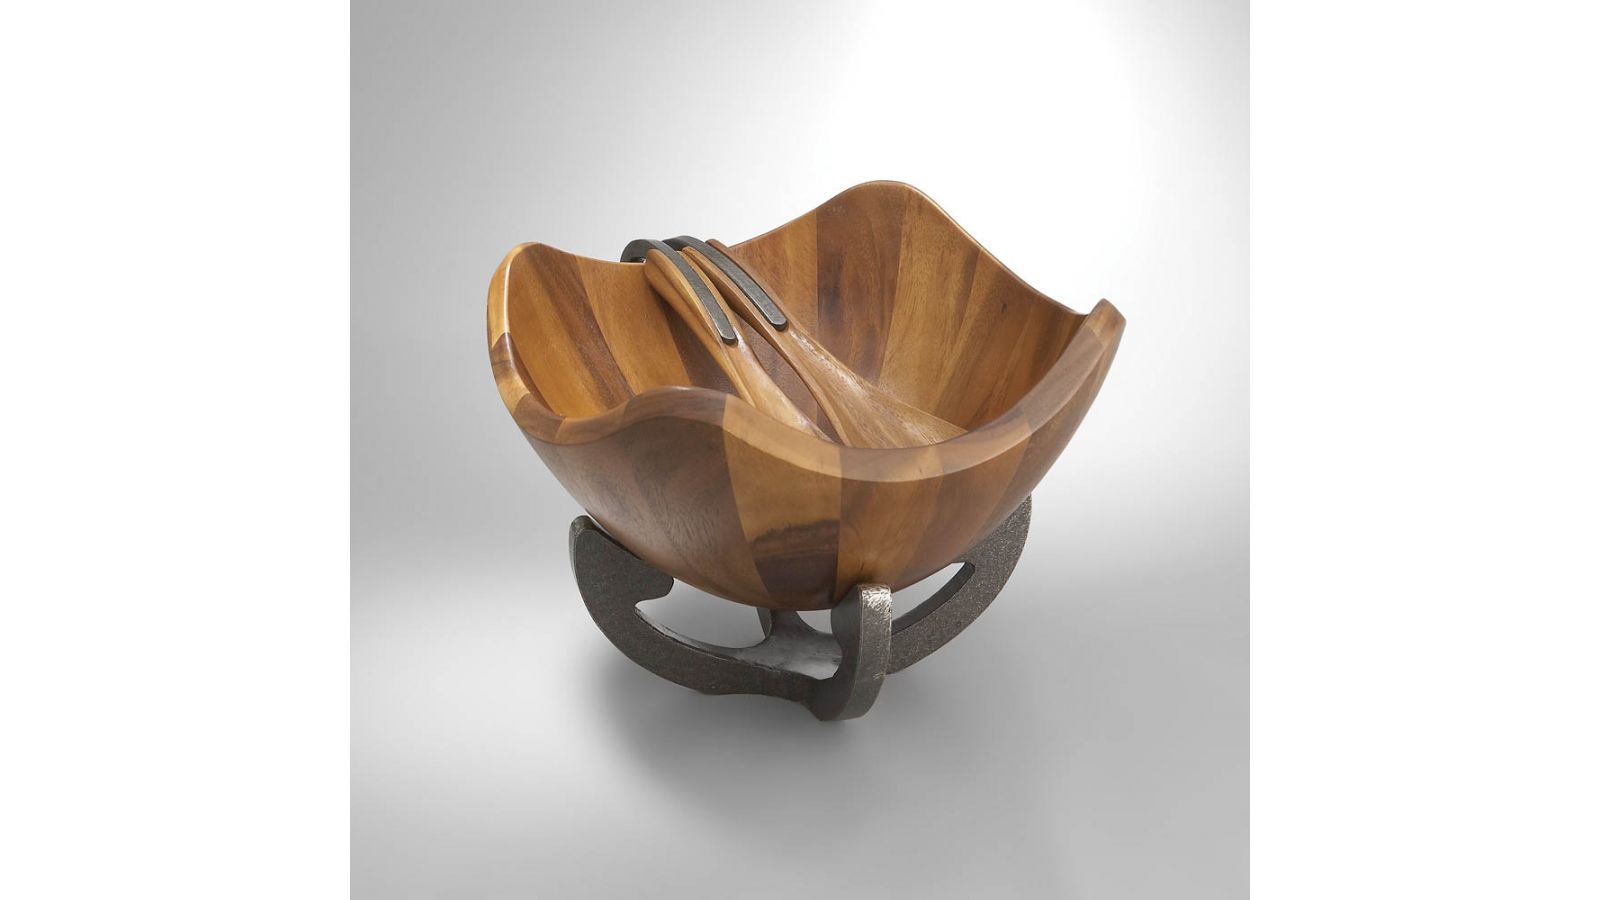 Nambe Scroll Salad Bowl with Servers